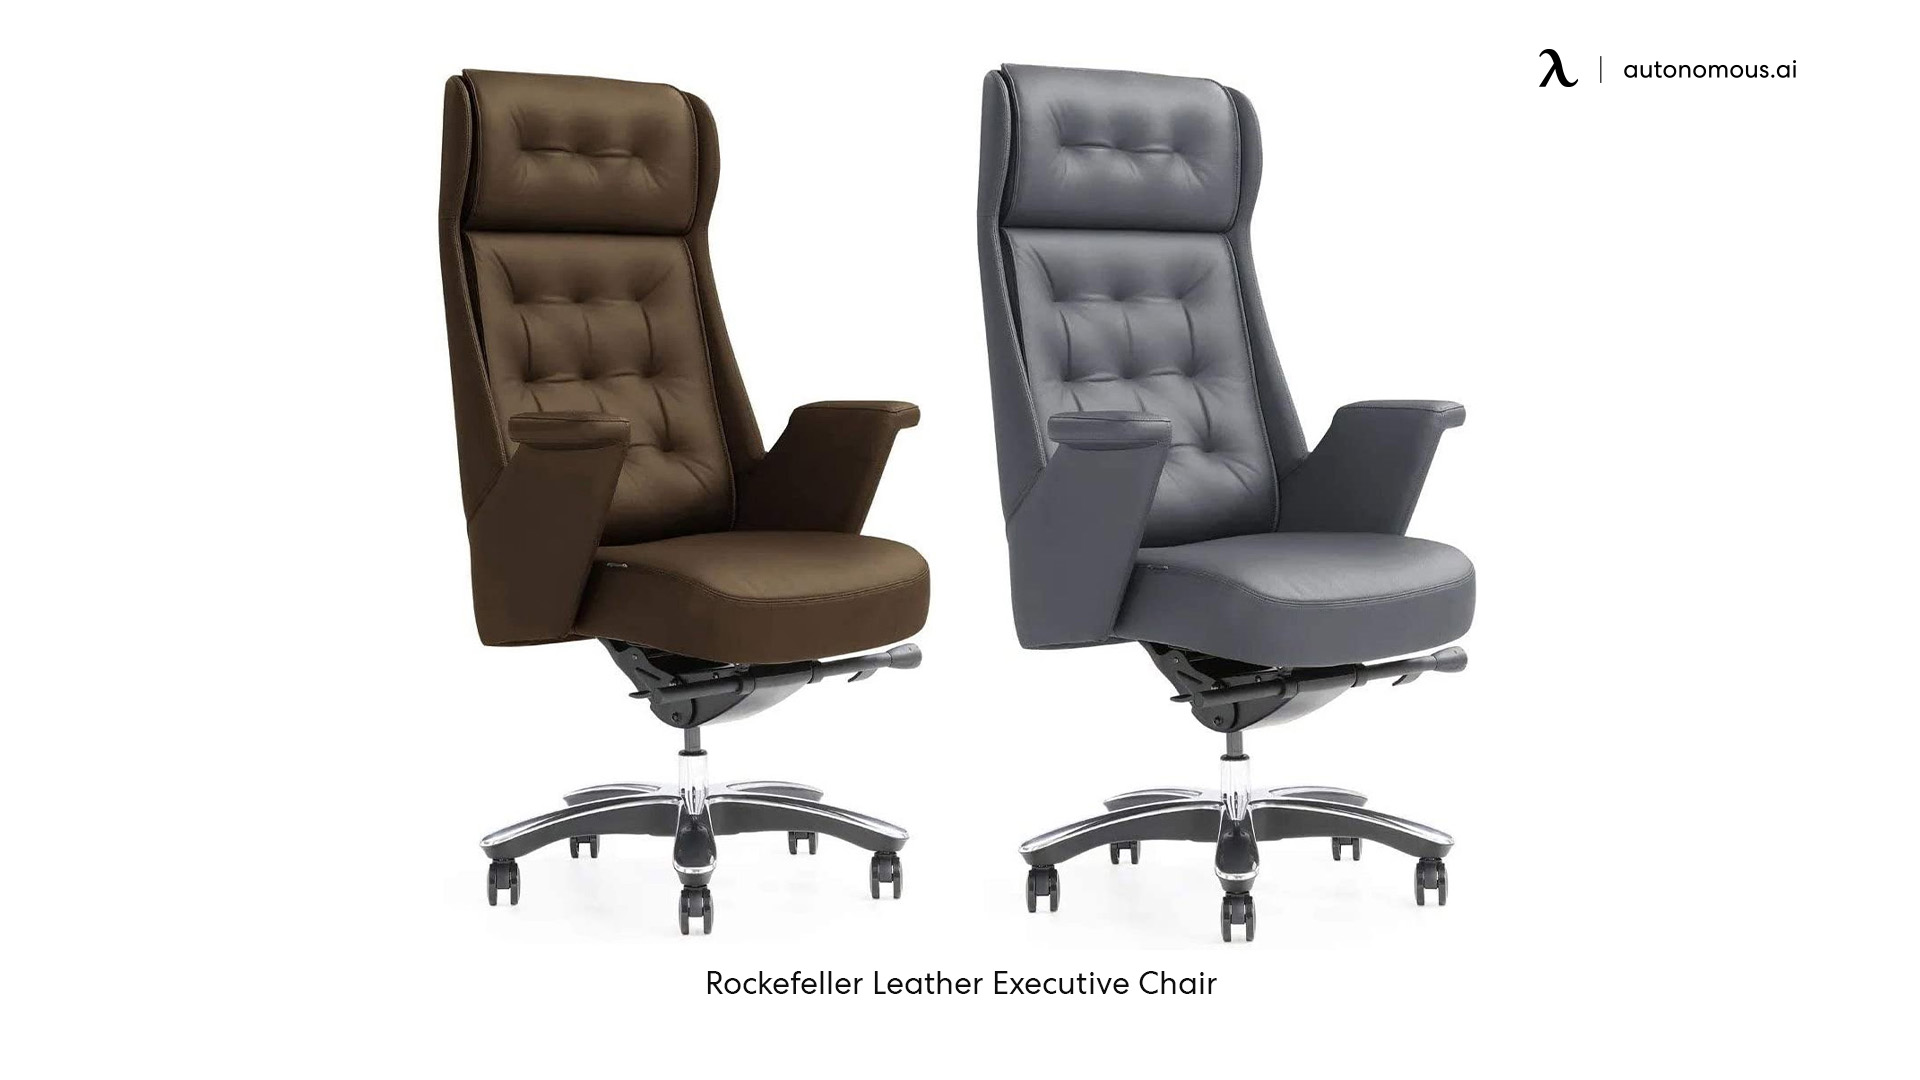 The Rockefeller executive chair from Zuri